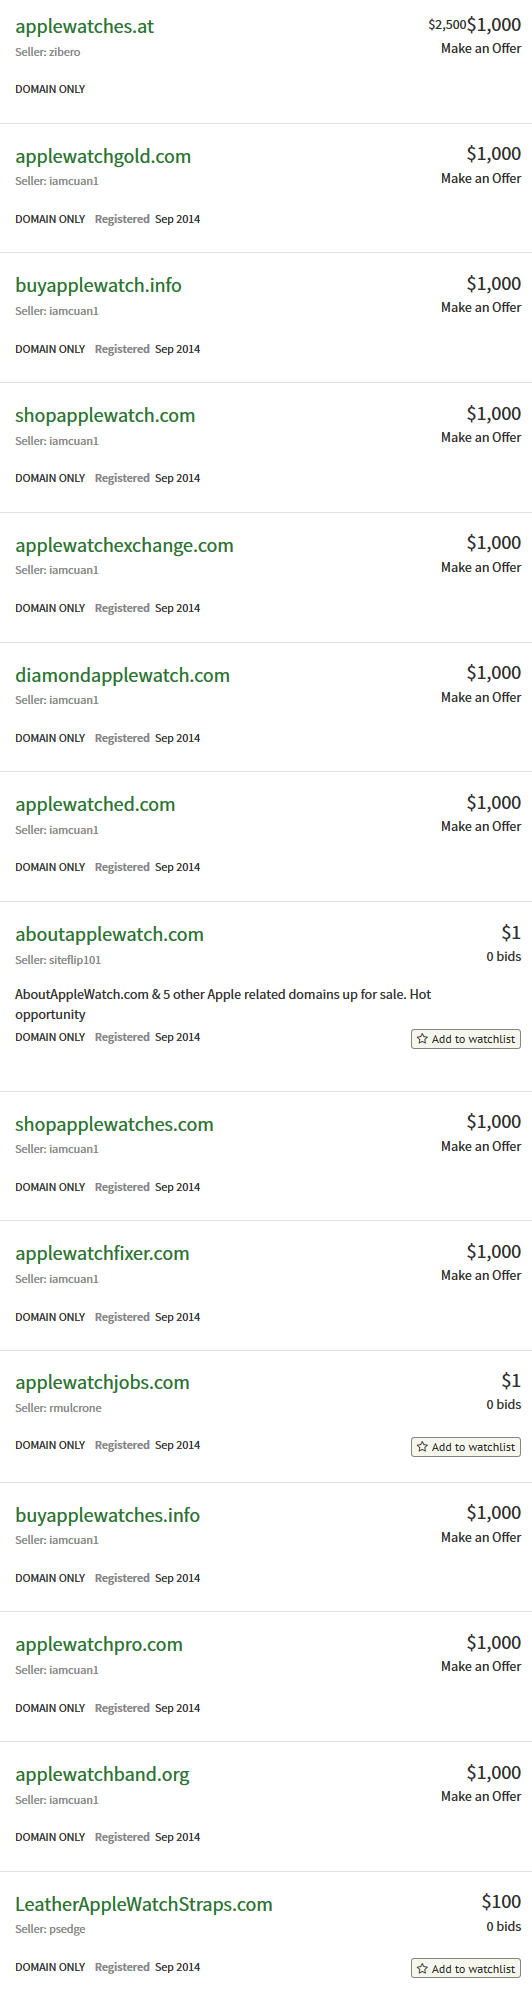 "AppleWatch" domains listed for sale on Flippa.com